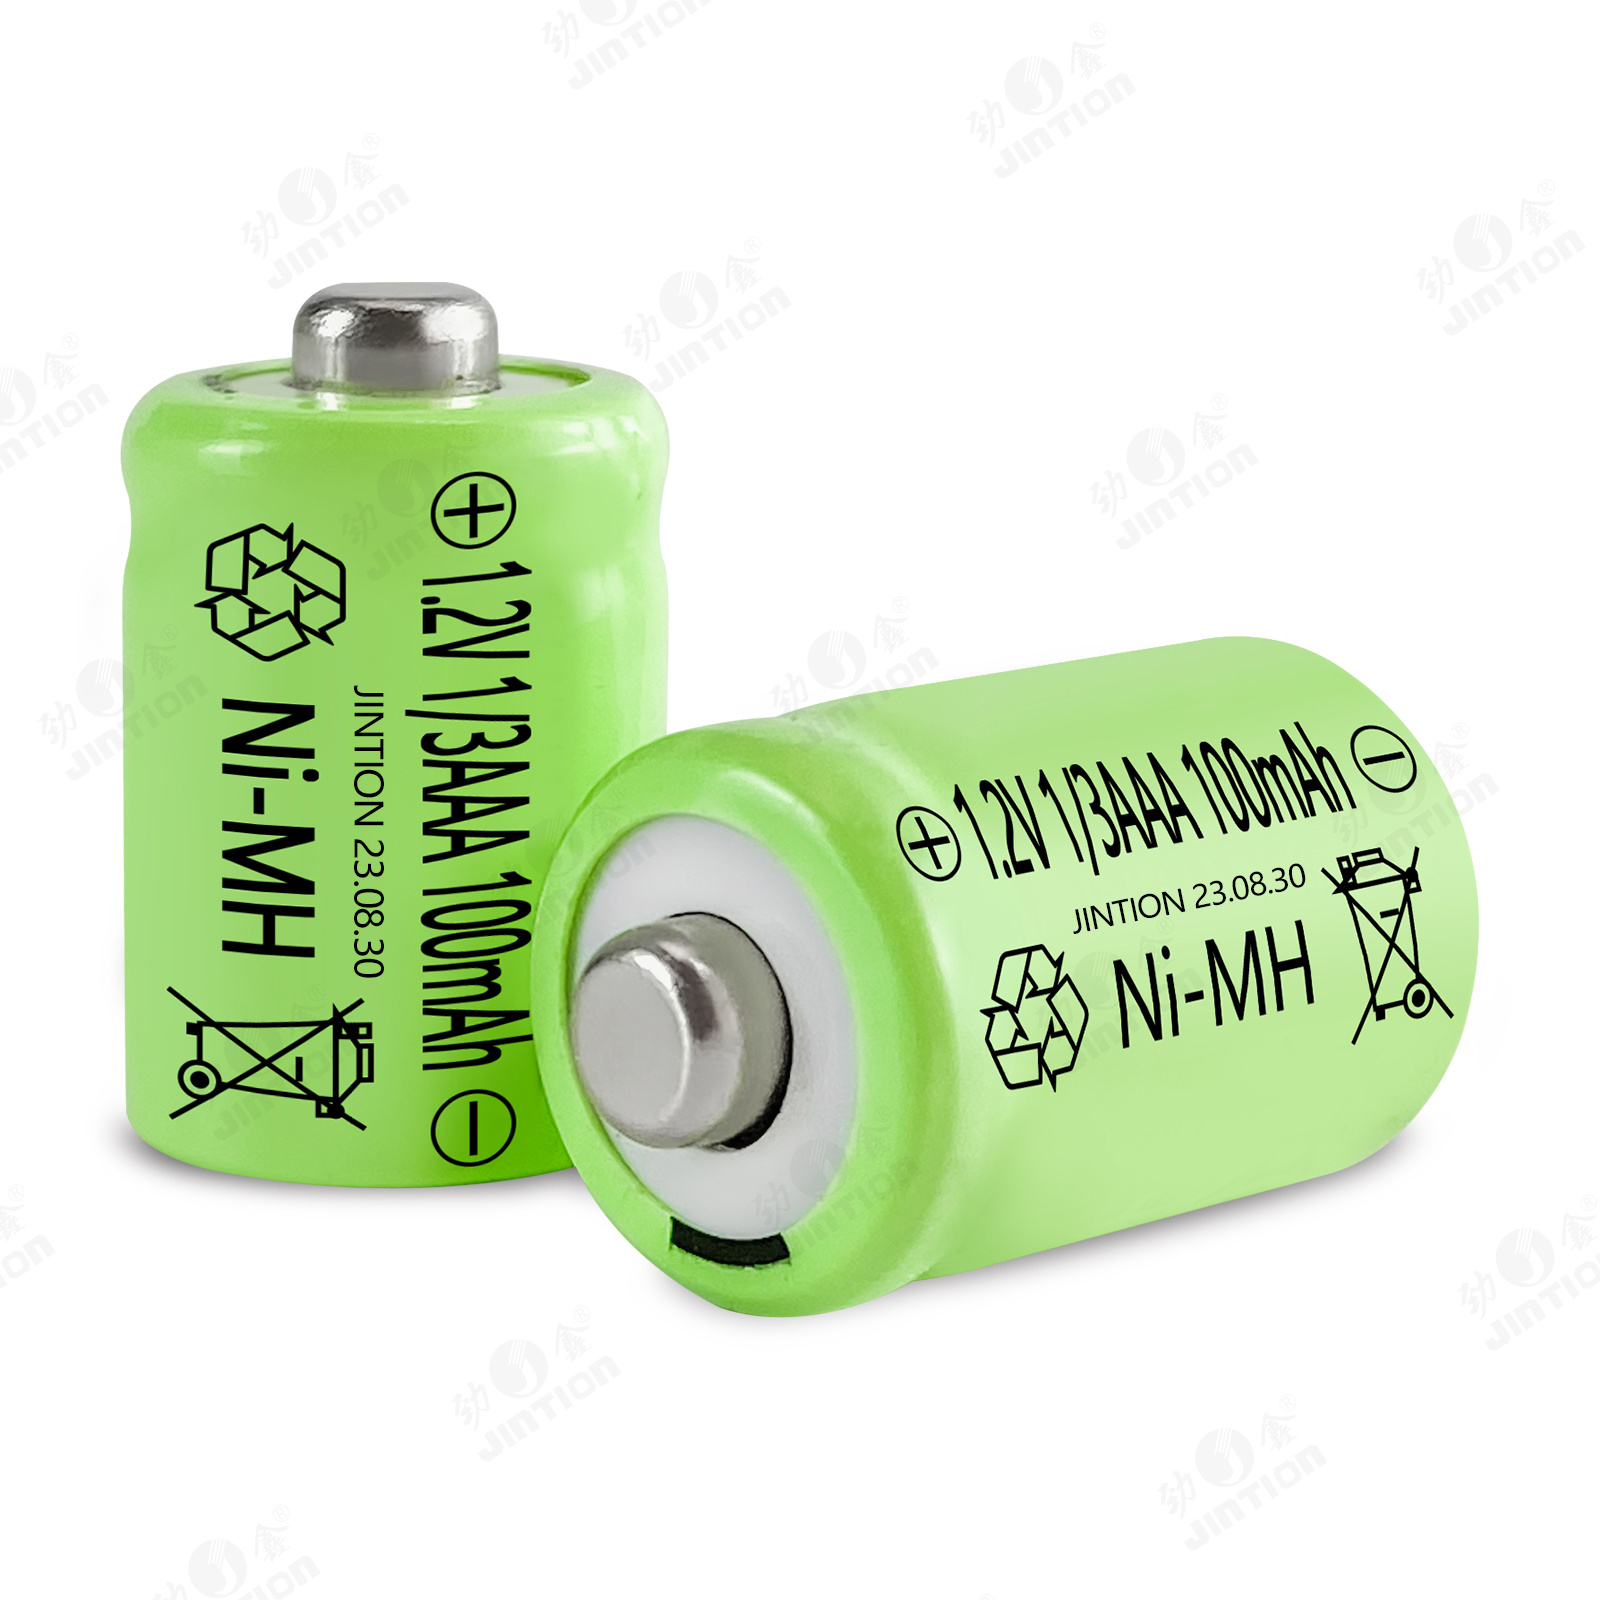 JINTION 1/3AAA 1000MAH 1.2V FOR solar lights or devices